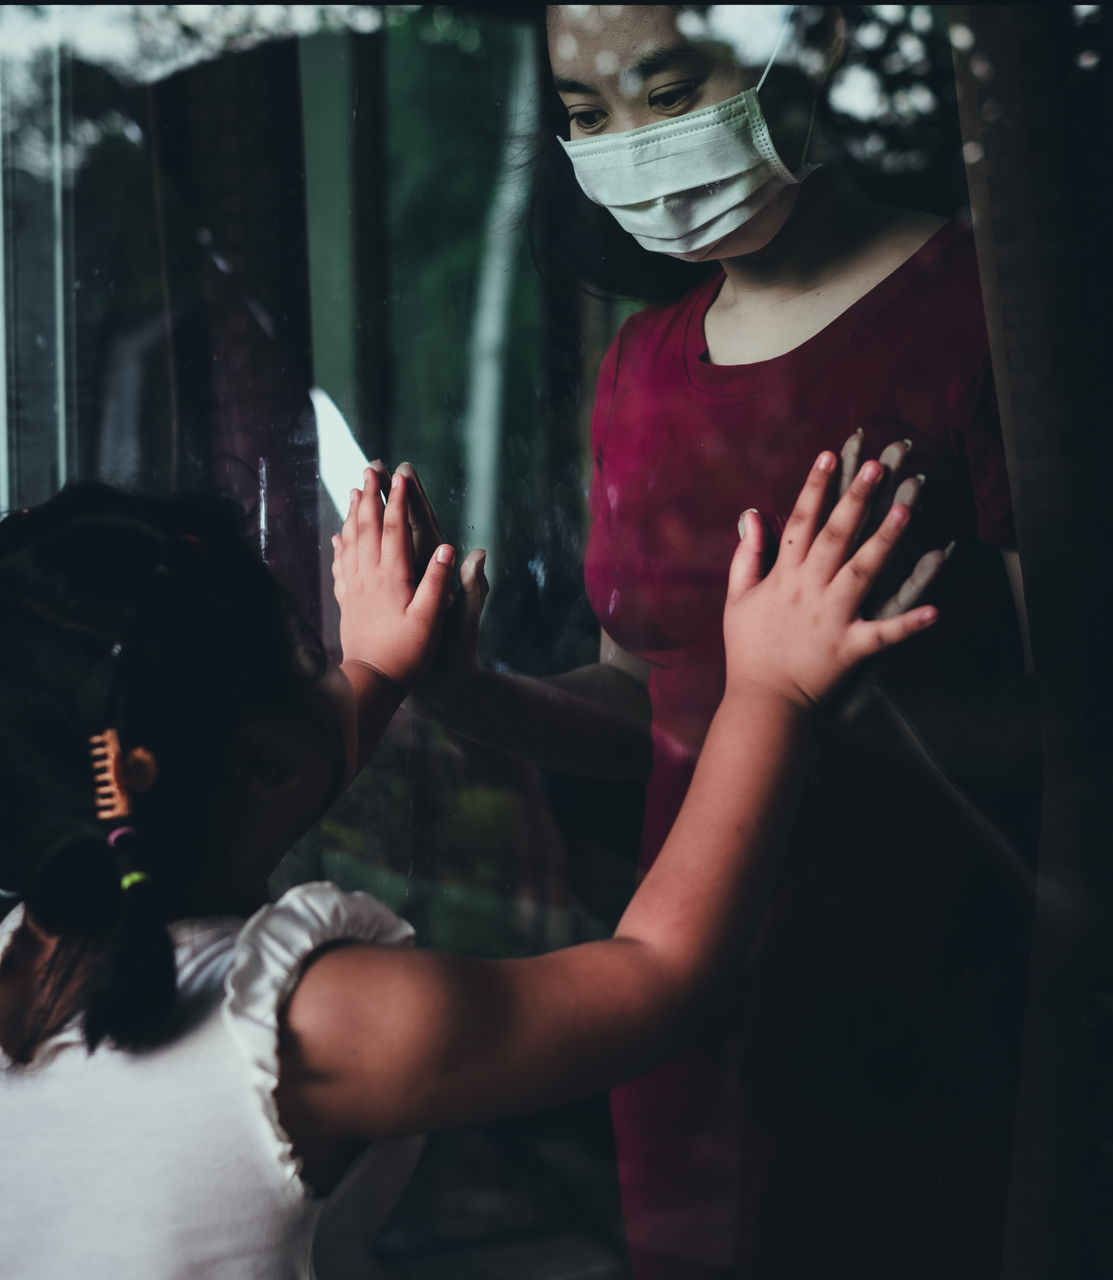 Mother wear face mask meeting daughter and touching hand through the window